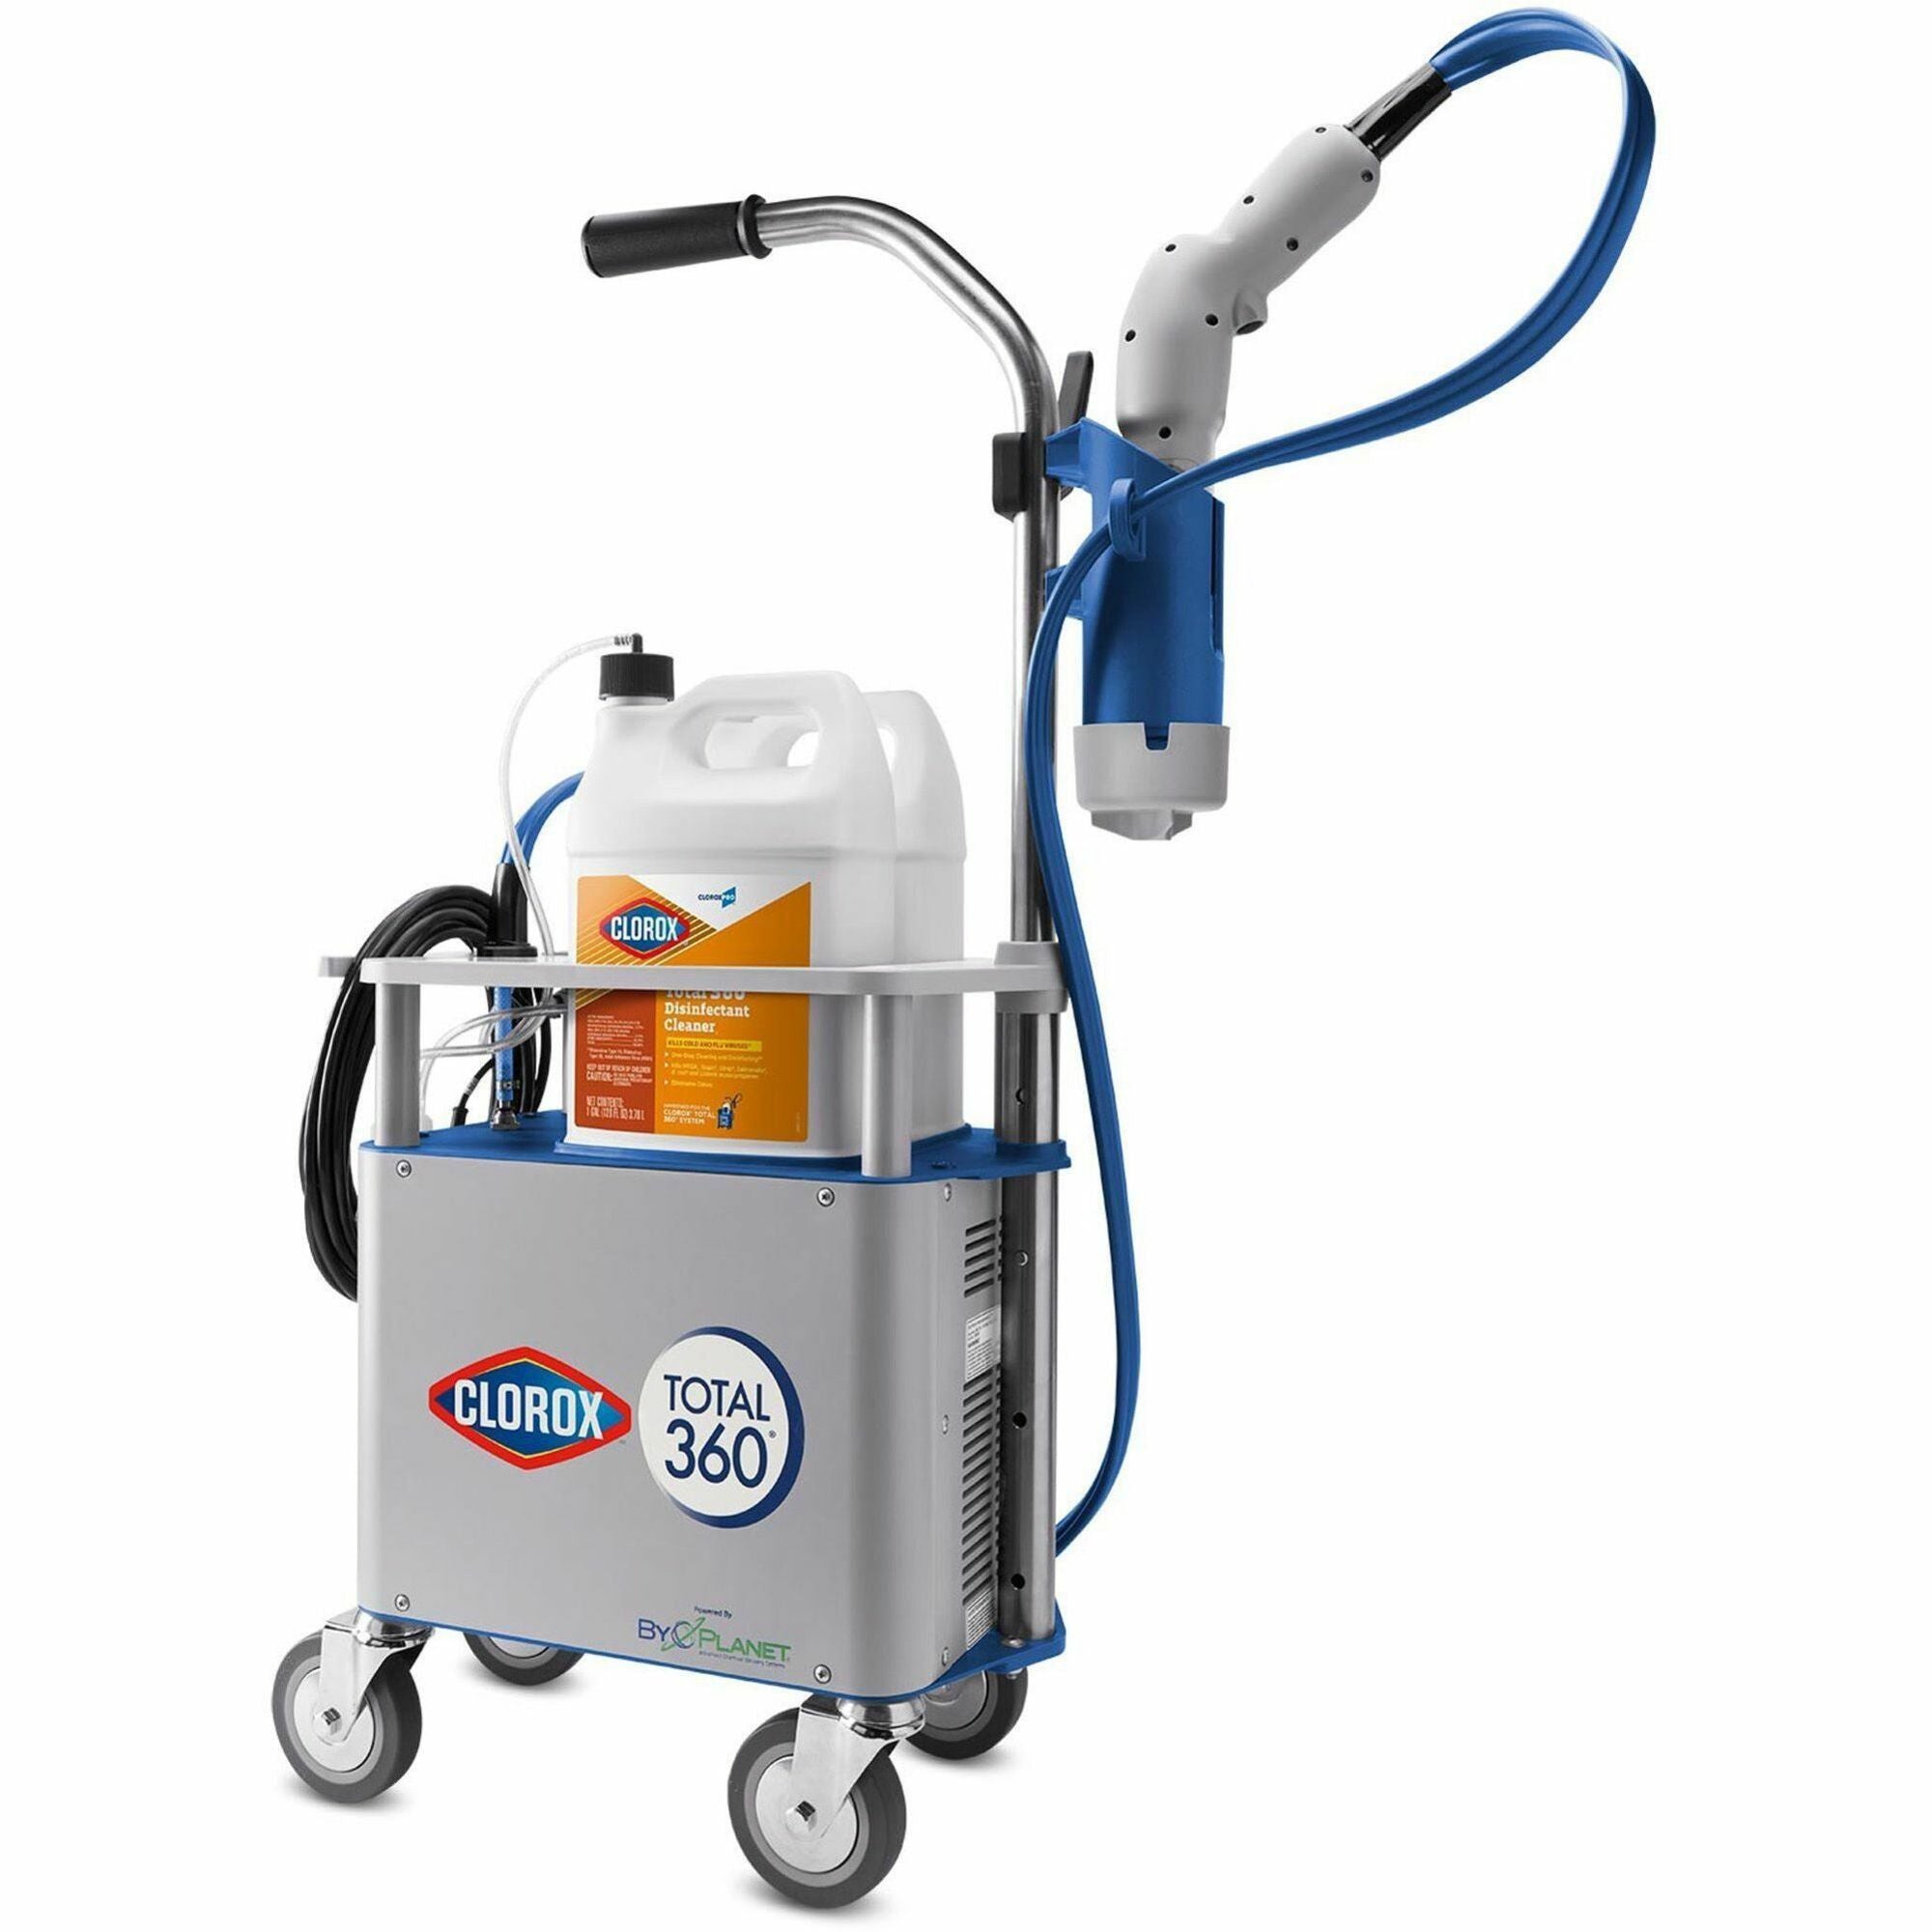 CloroxPro Total 360 Electrostatic Sprayer - Suitable For School, Office, Kitchen, Restroom, Waiting Room, Patient Room, Airport - Disinfectant - 32" Height - 12.5" Width - 1 Each - 1